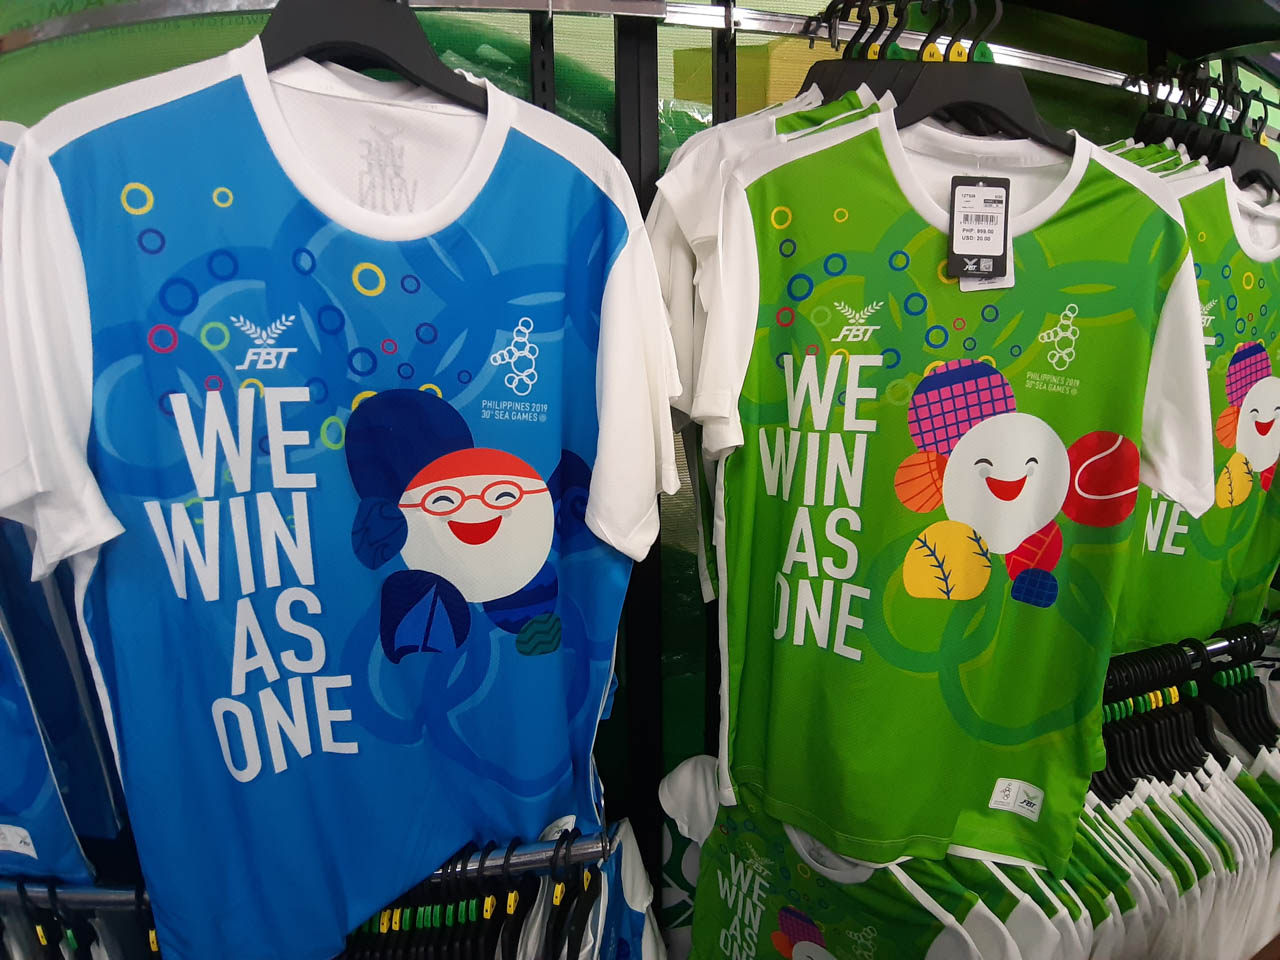 FOR KIDS. The dri-fit shirt featuring SEA Games mascot Pami comes in kids sizes. Photo by Mau Victa/Rappler   